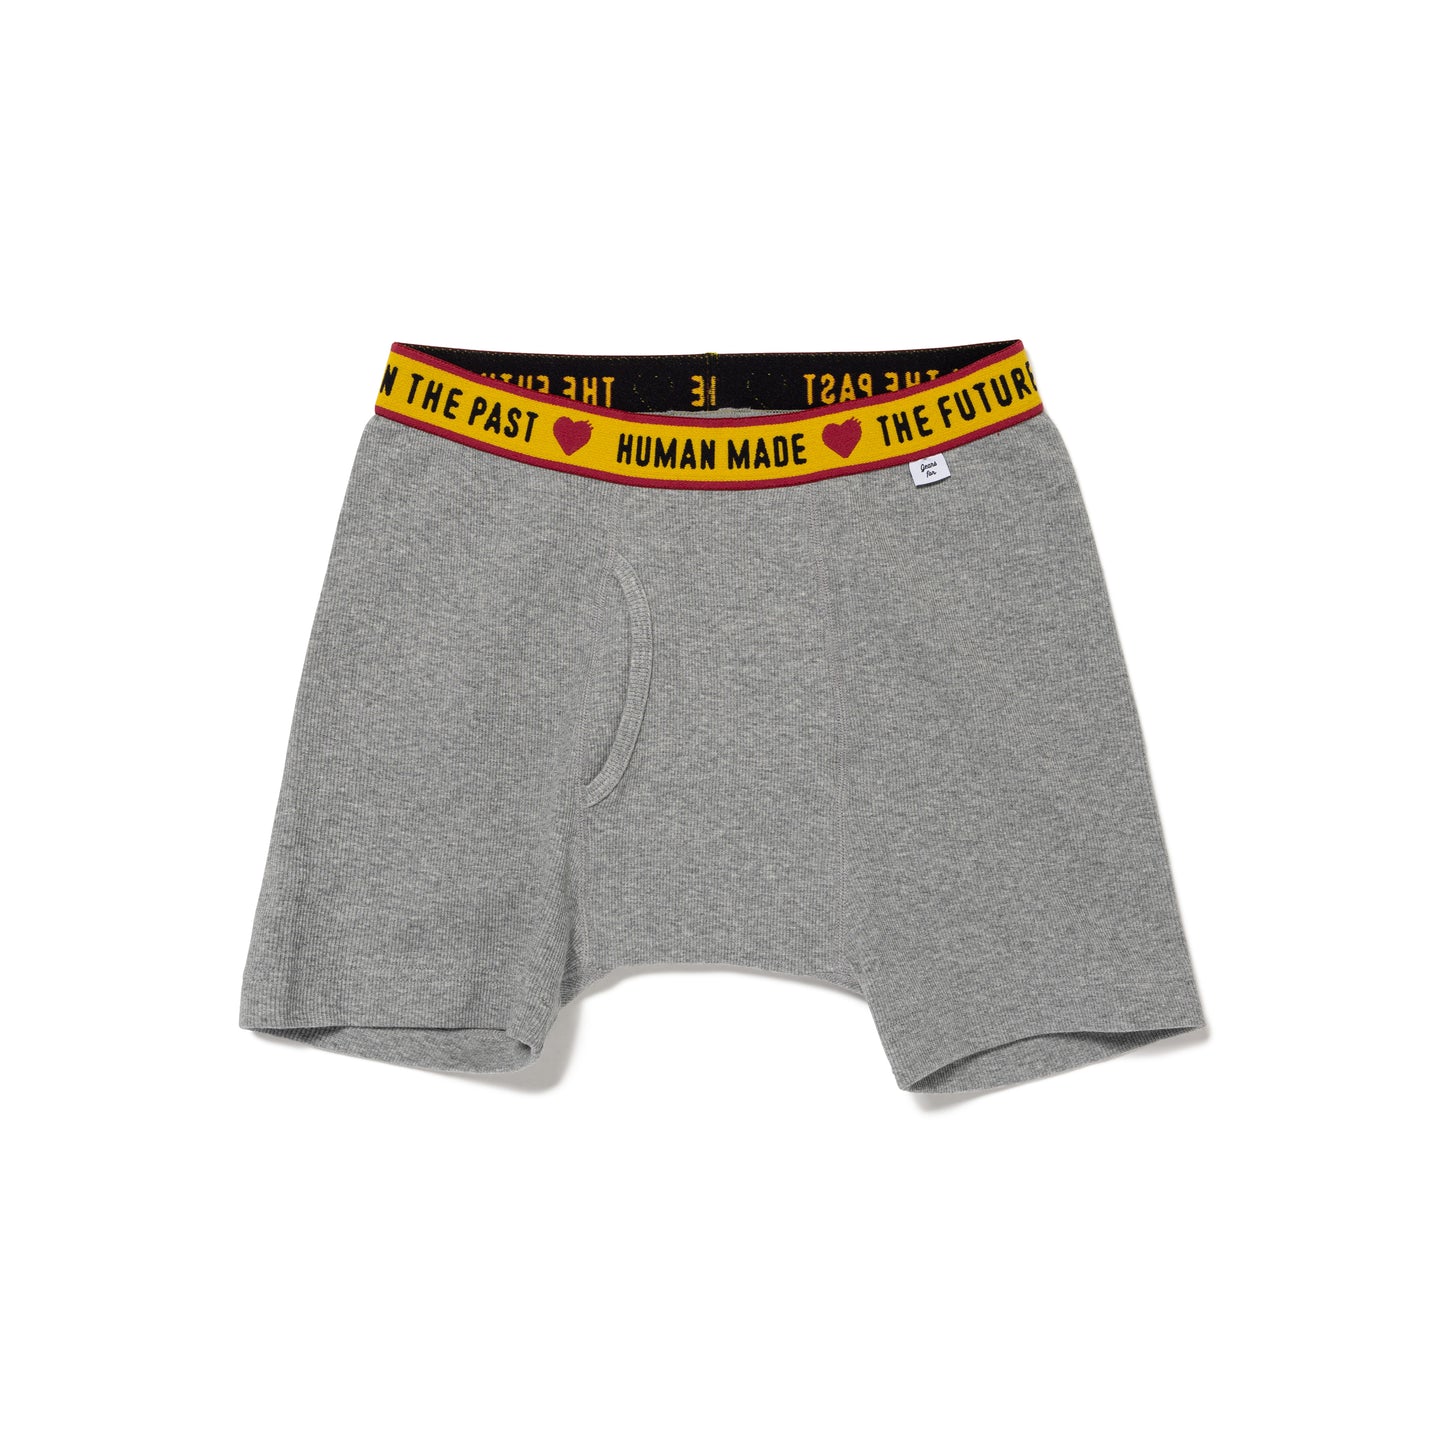 HUMAN MADE HM BOXER BRIEF GY-A